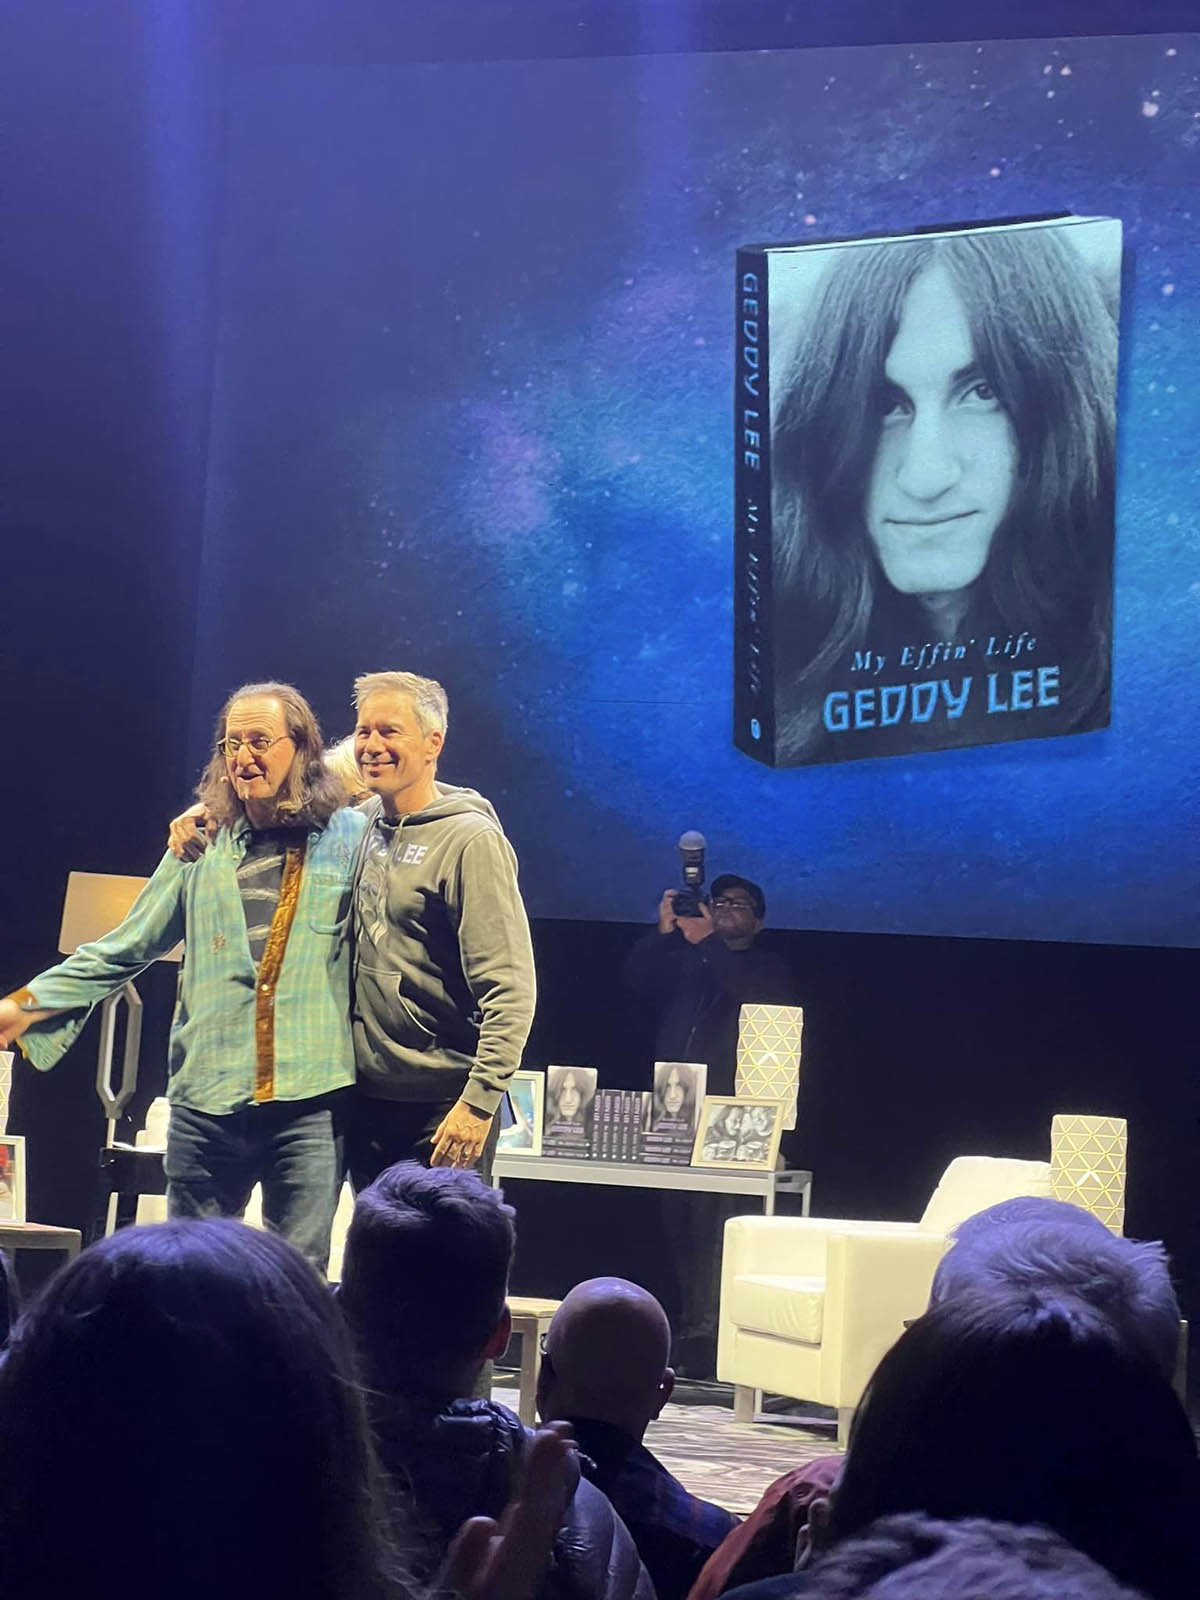 Geddy Lee 'My Effin' Life In Conversation' Tour Pictures - Orpheum Theatre - Boston, Massachusettes - November 18th, 2023